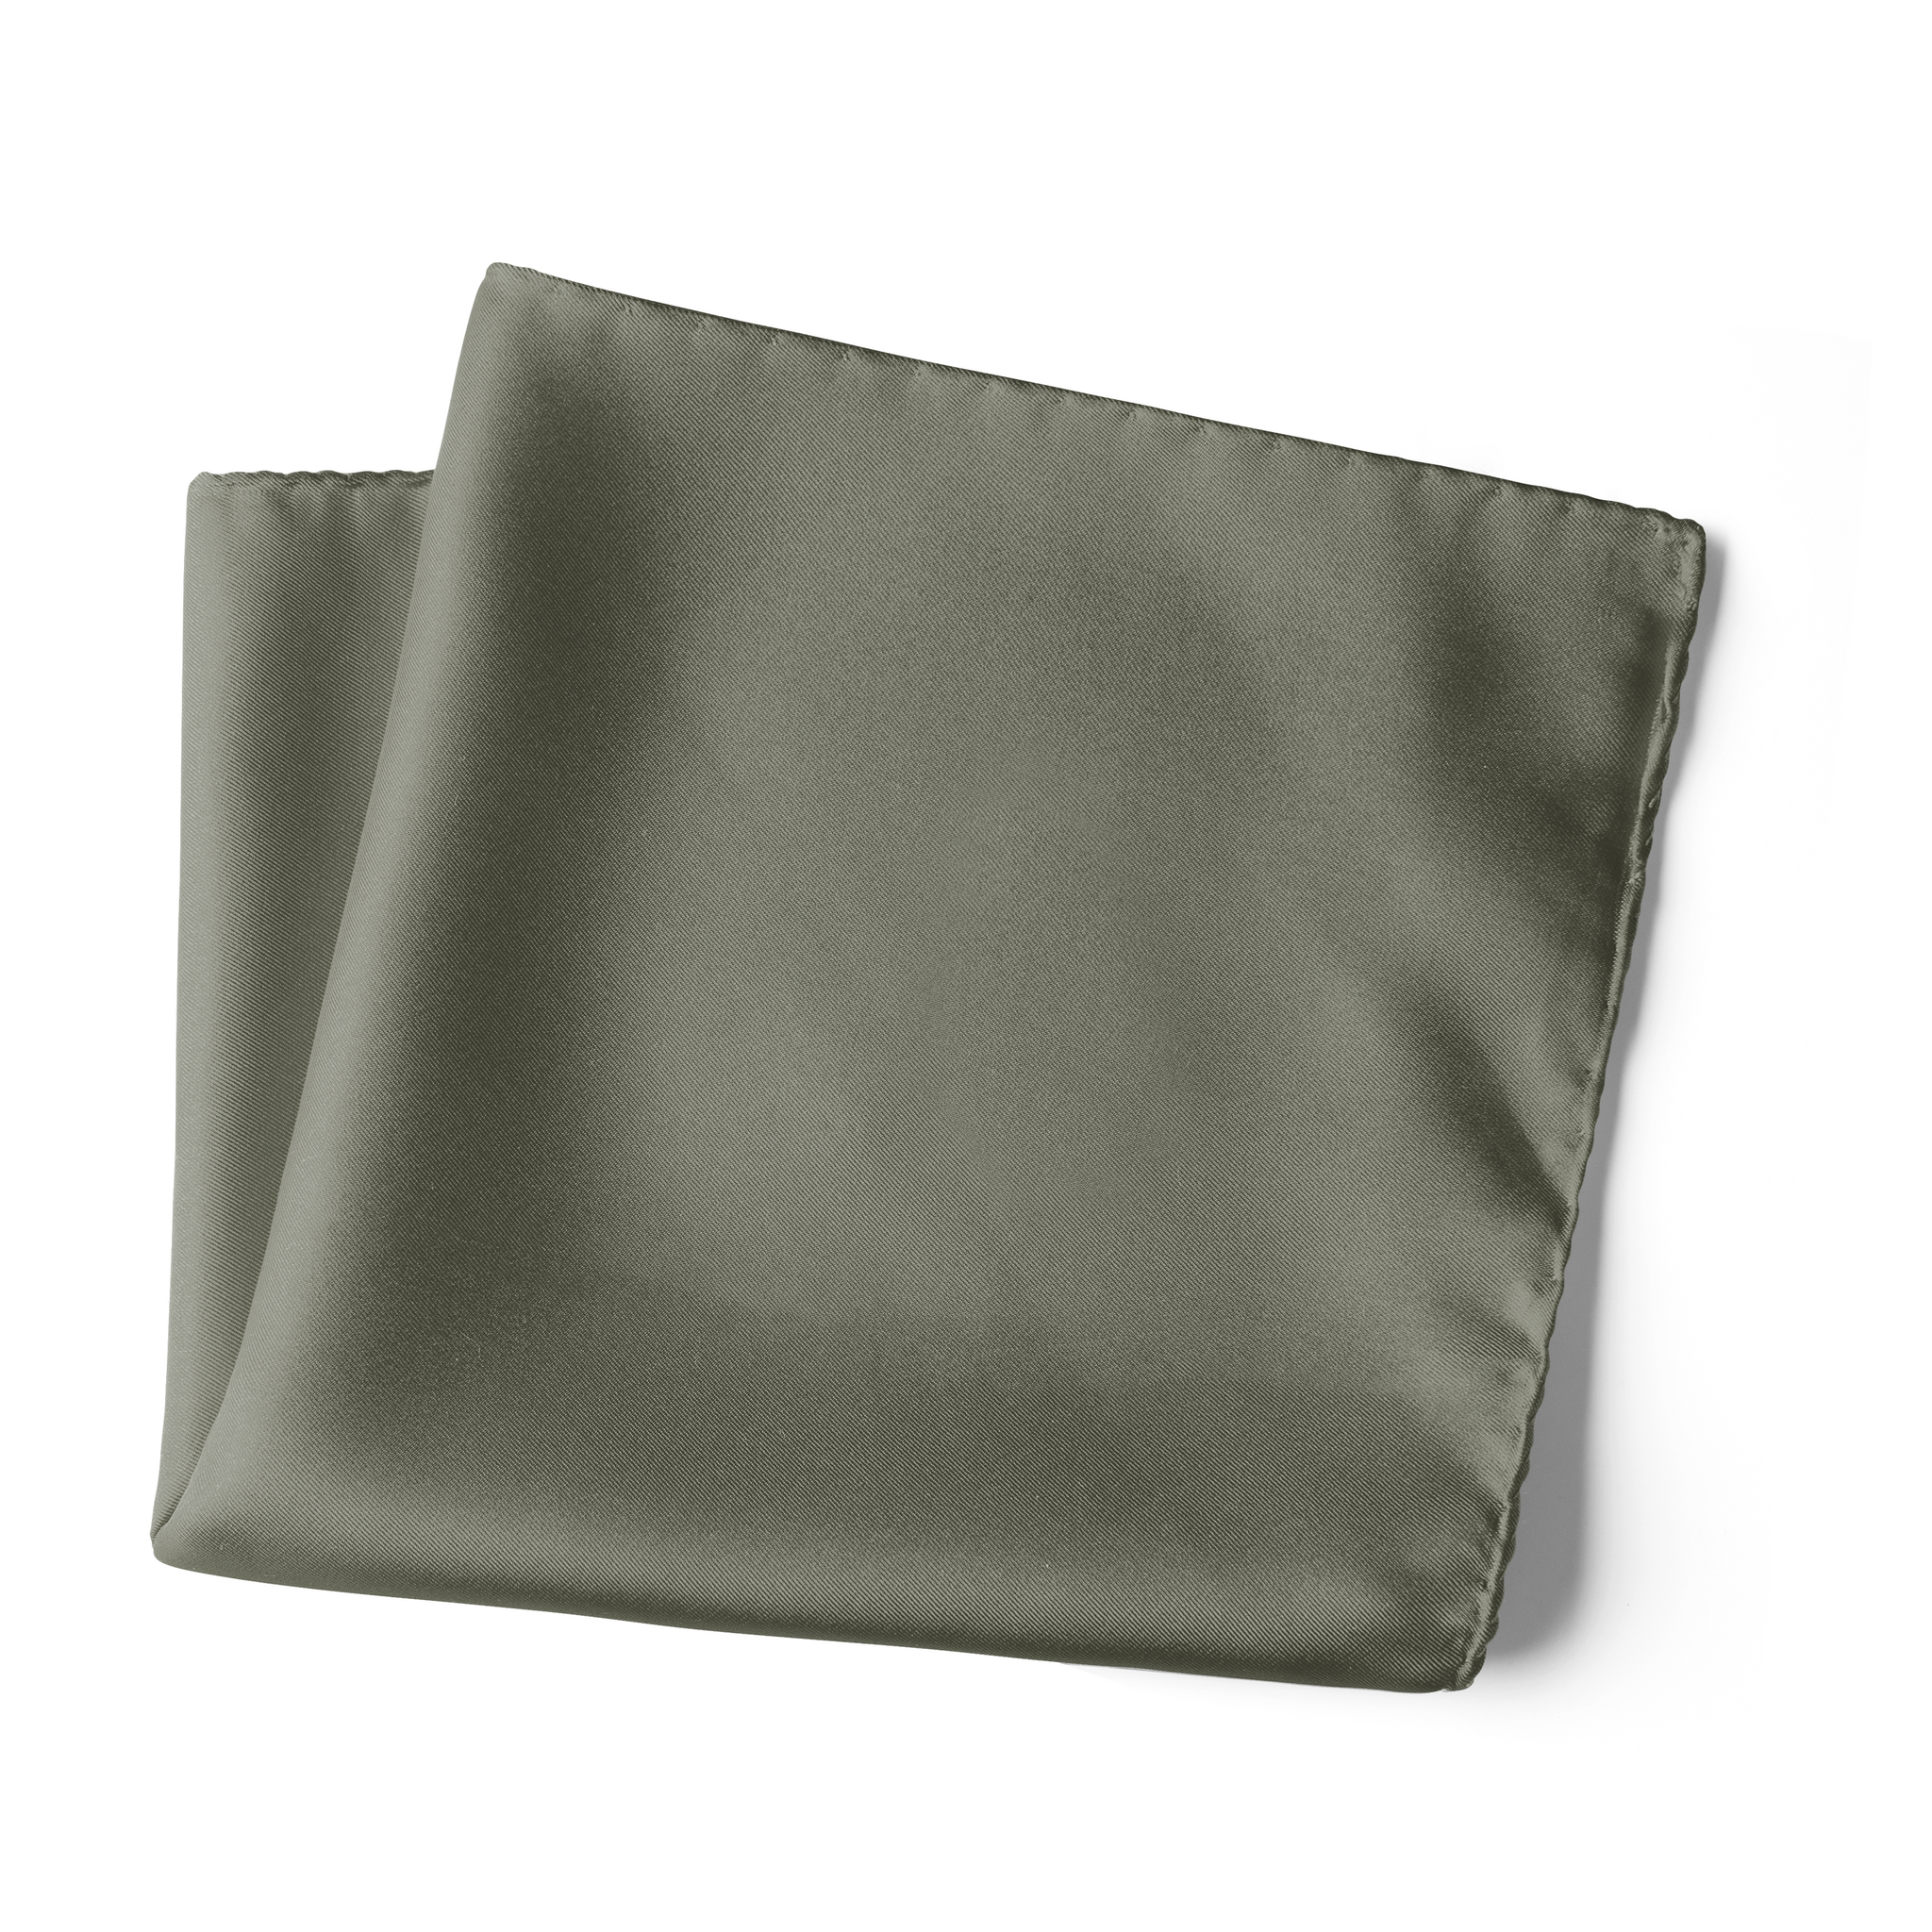 Chokore Grey Pure Silk Pocket Square, from the Solids Line